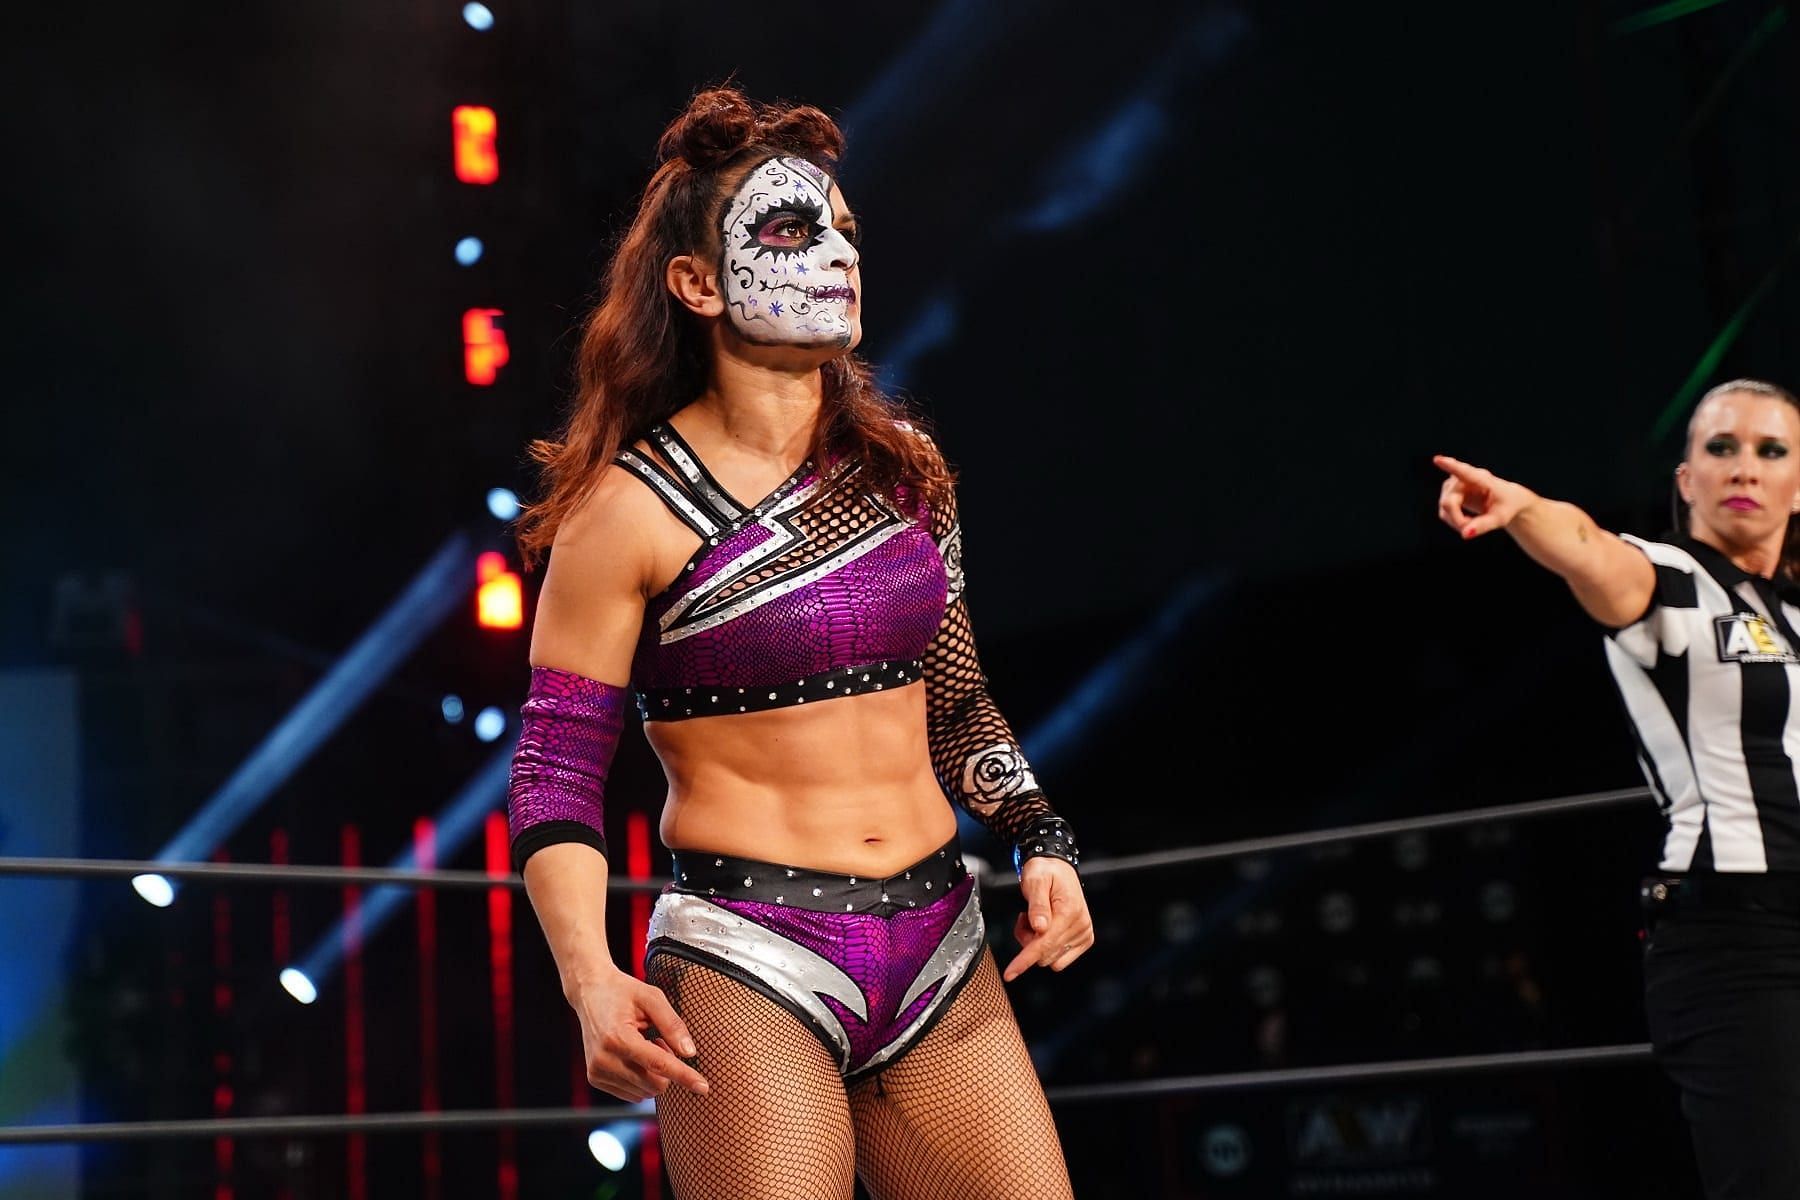 AEW star Thunder Rosa confirms that she suffered a concussion recently